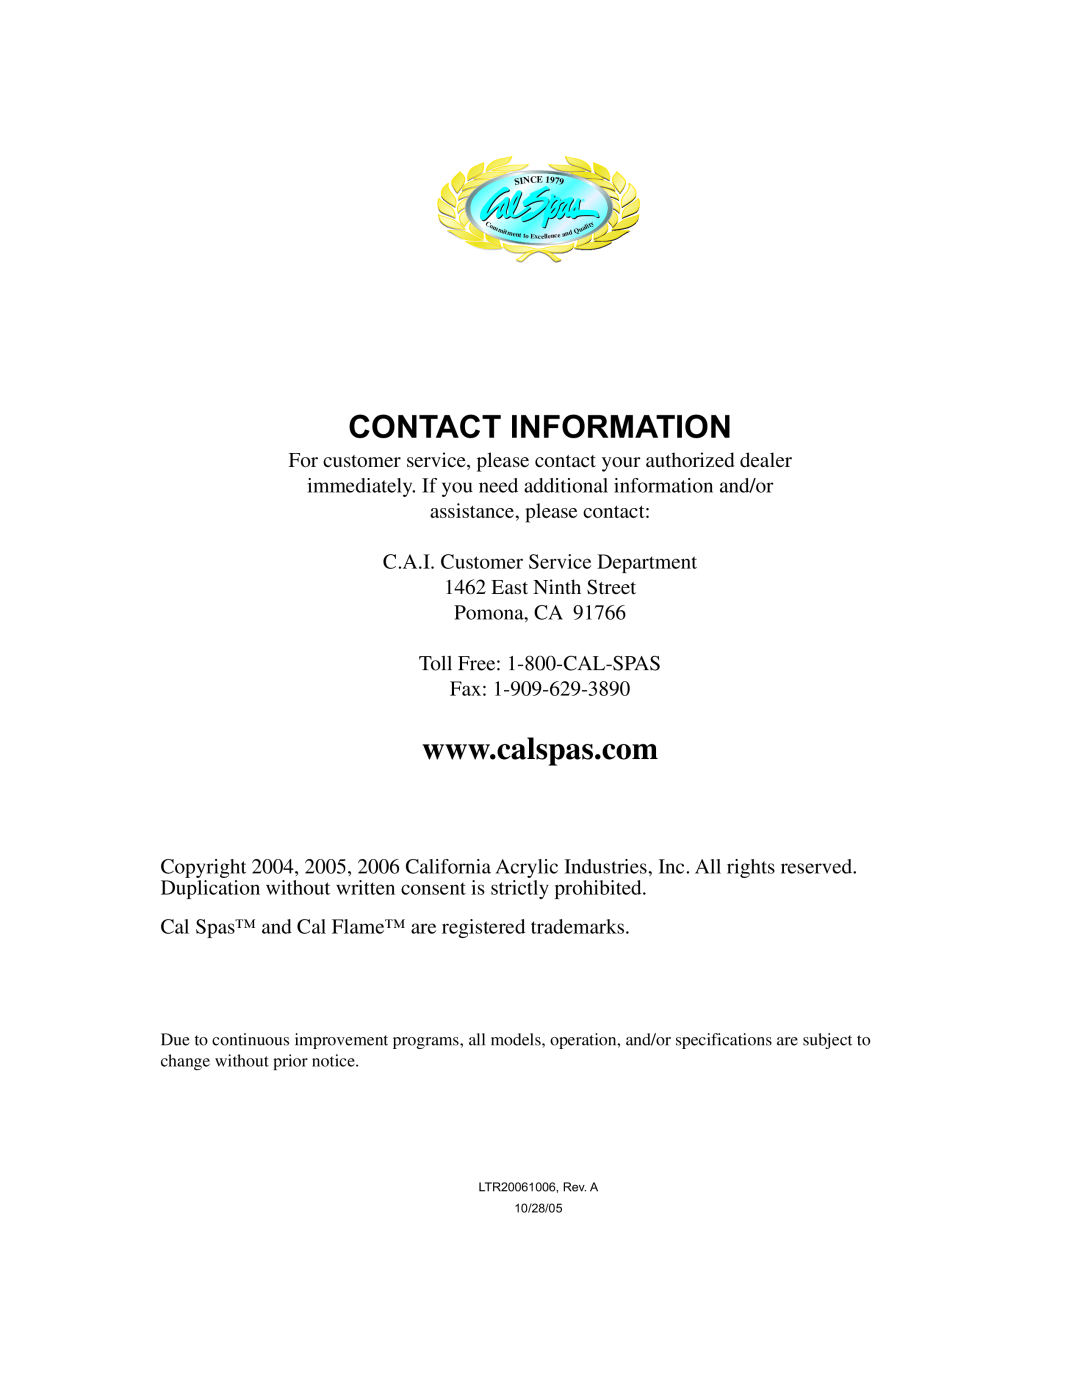 Cal Flame Fireplaces & Firepits 2006 manual Contact Information 